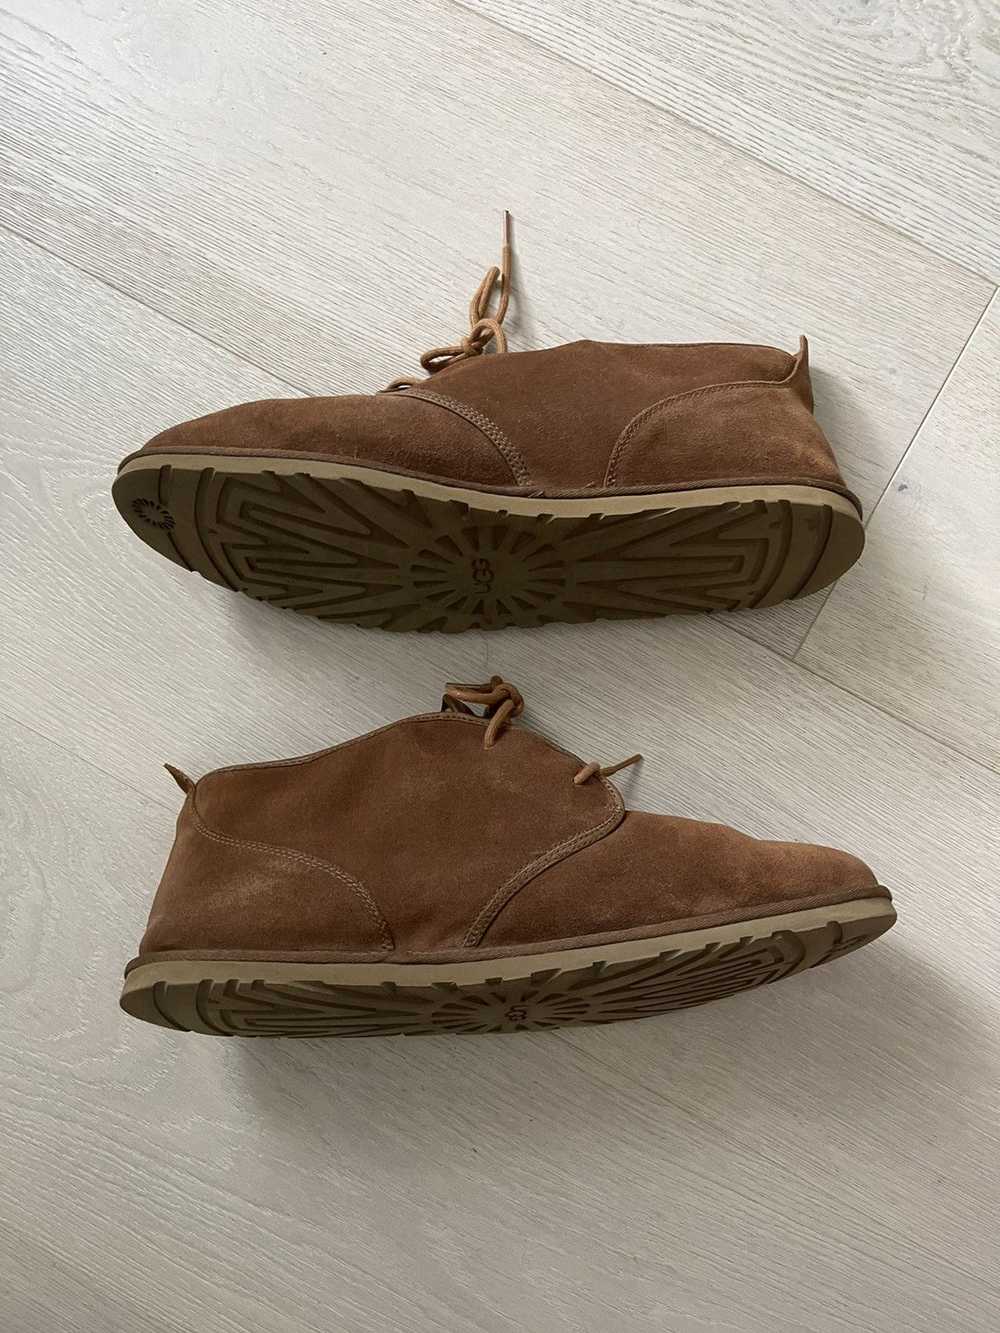 Ugg SIZE 18 UGG Low Top Slippers - image 2